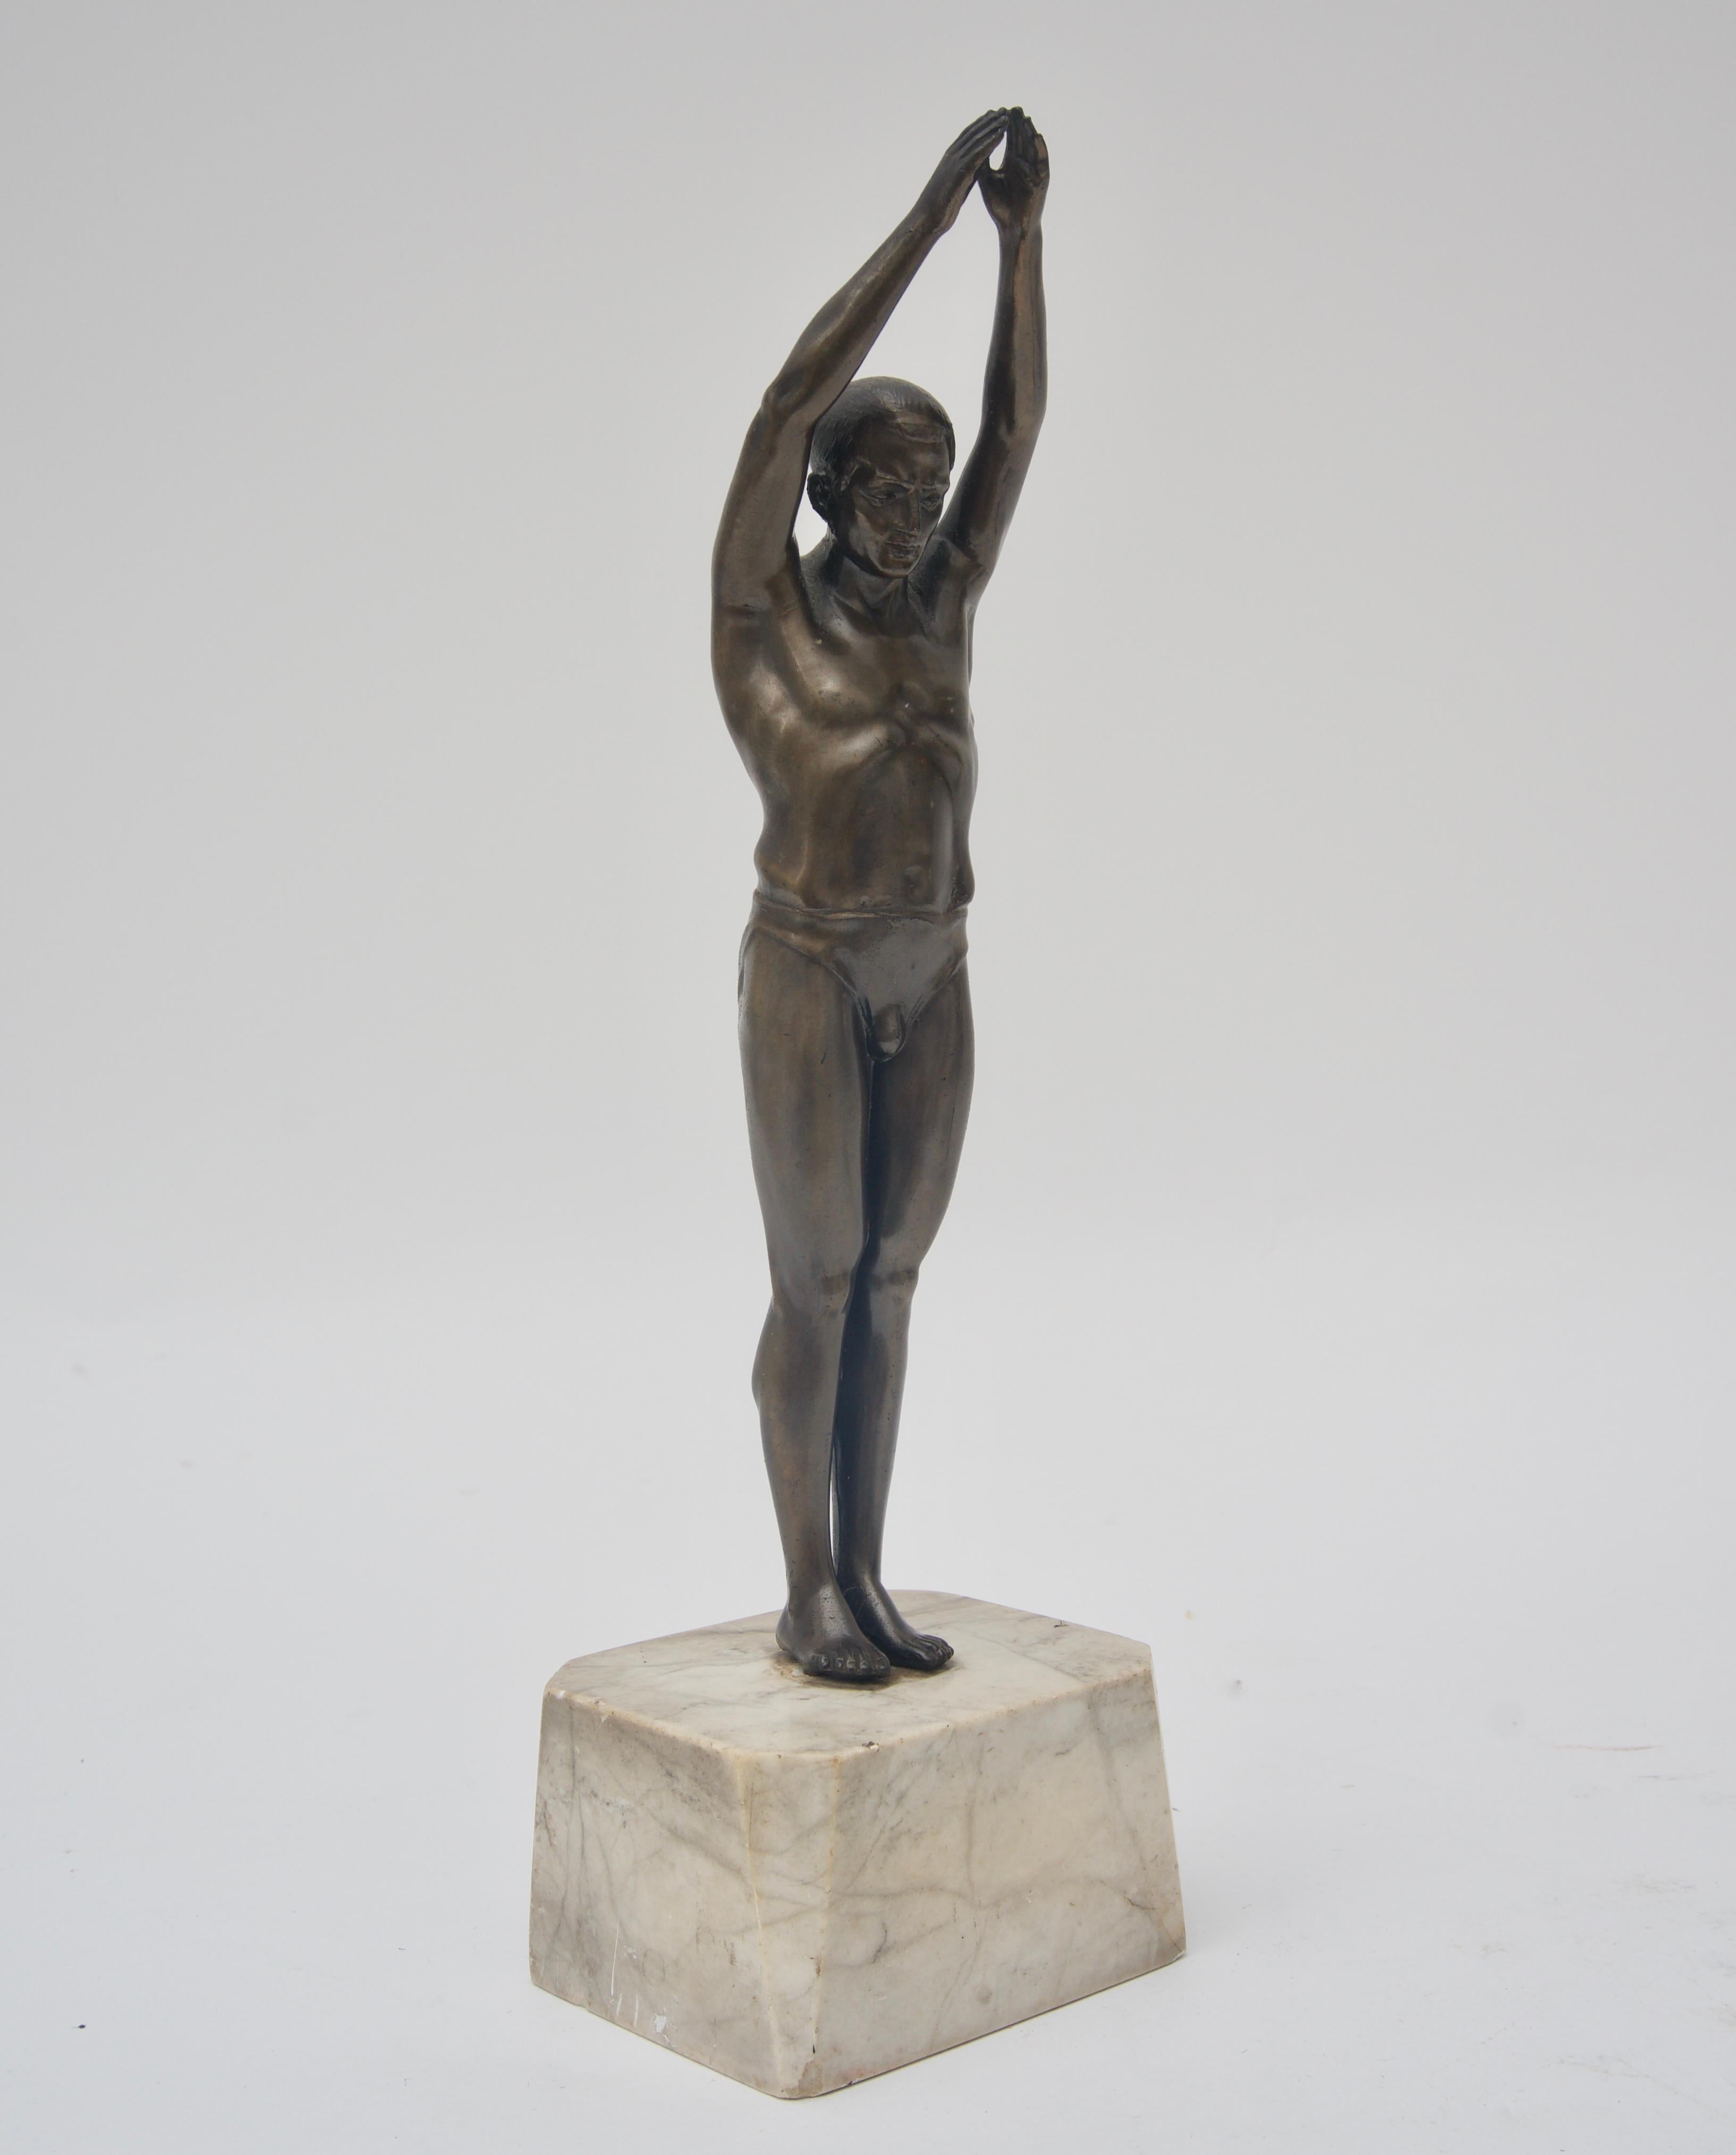 This stylish German Art Deco sculpture of a male diver was acquired from a South Beach, Florida estate and it date to the 1930s.

Note: Base dimensions are 3.25